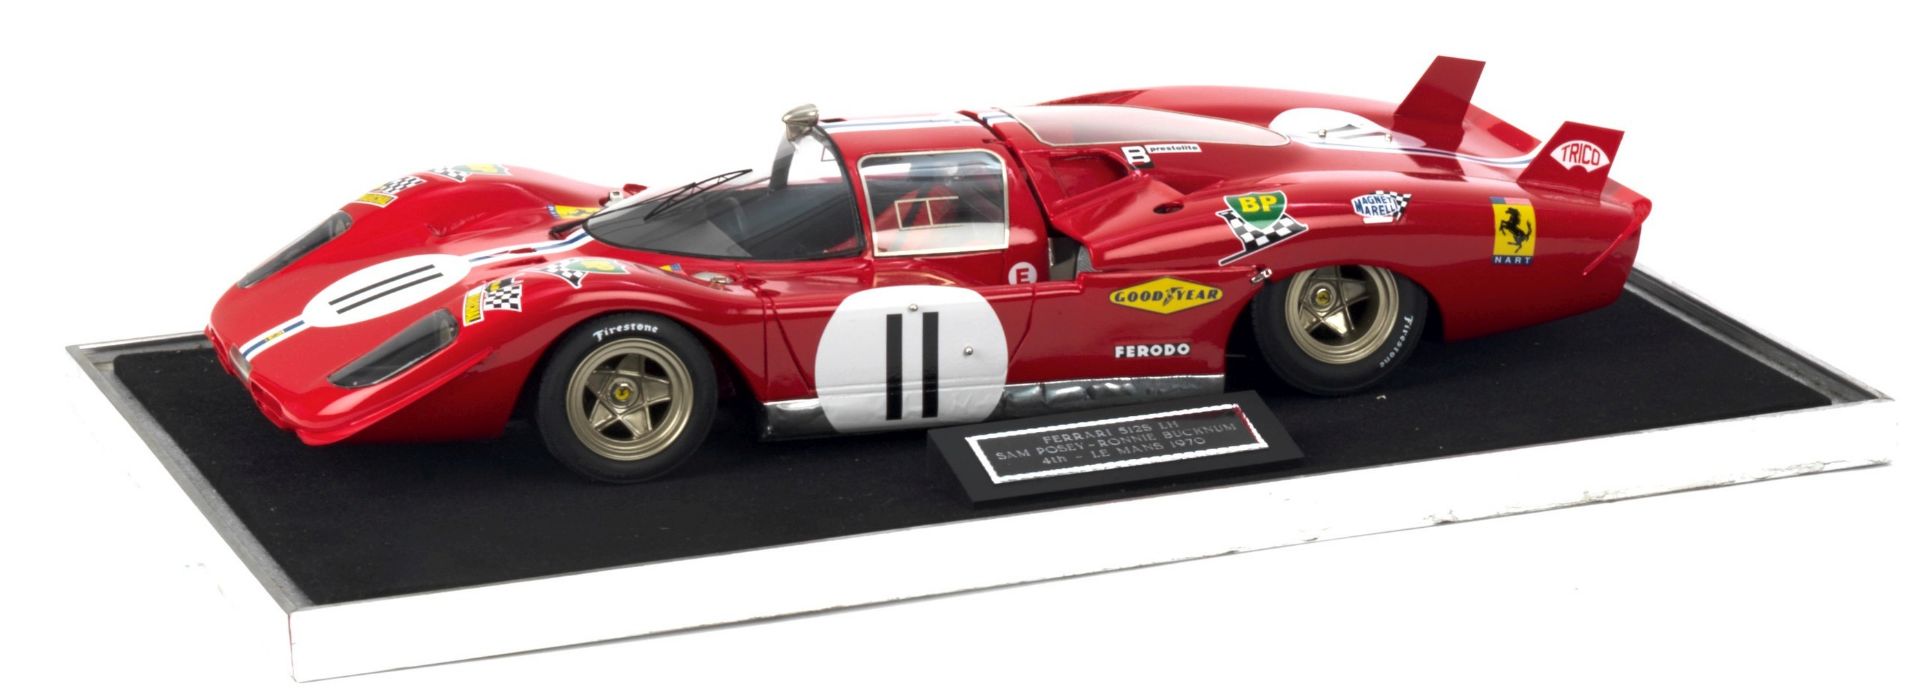 A 1:12 scale model of the 1970 Le Mans Ferrari 512S LH, by Midland Racing Models,